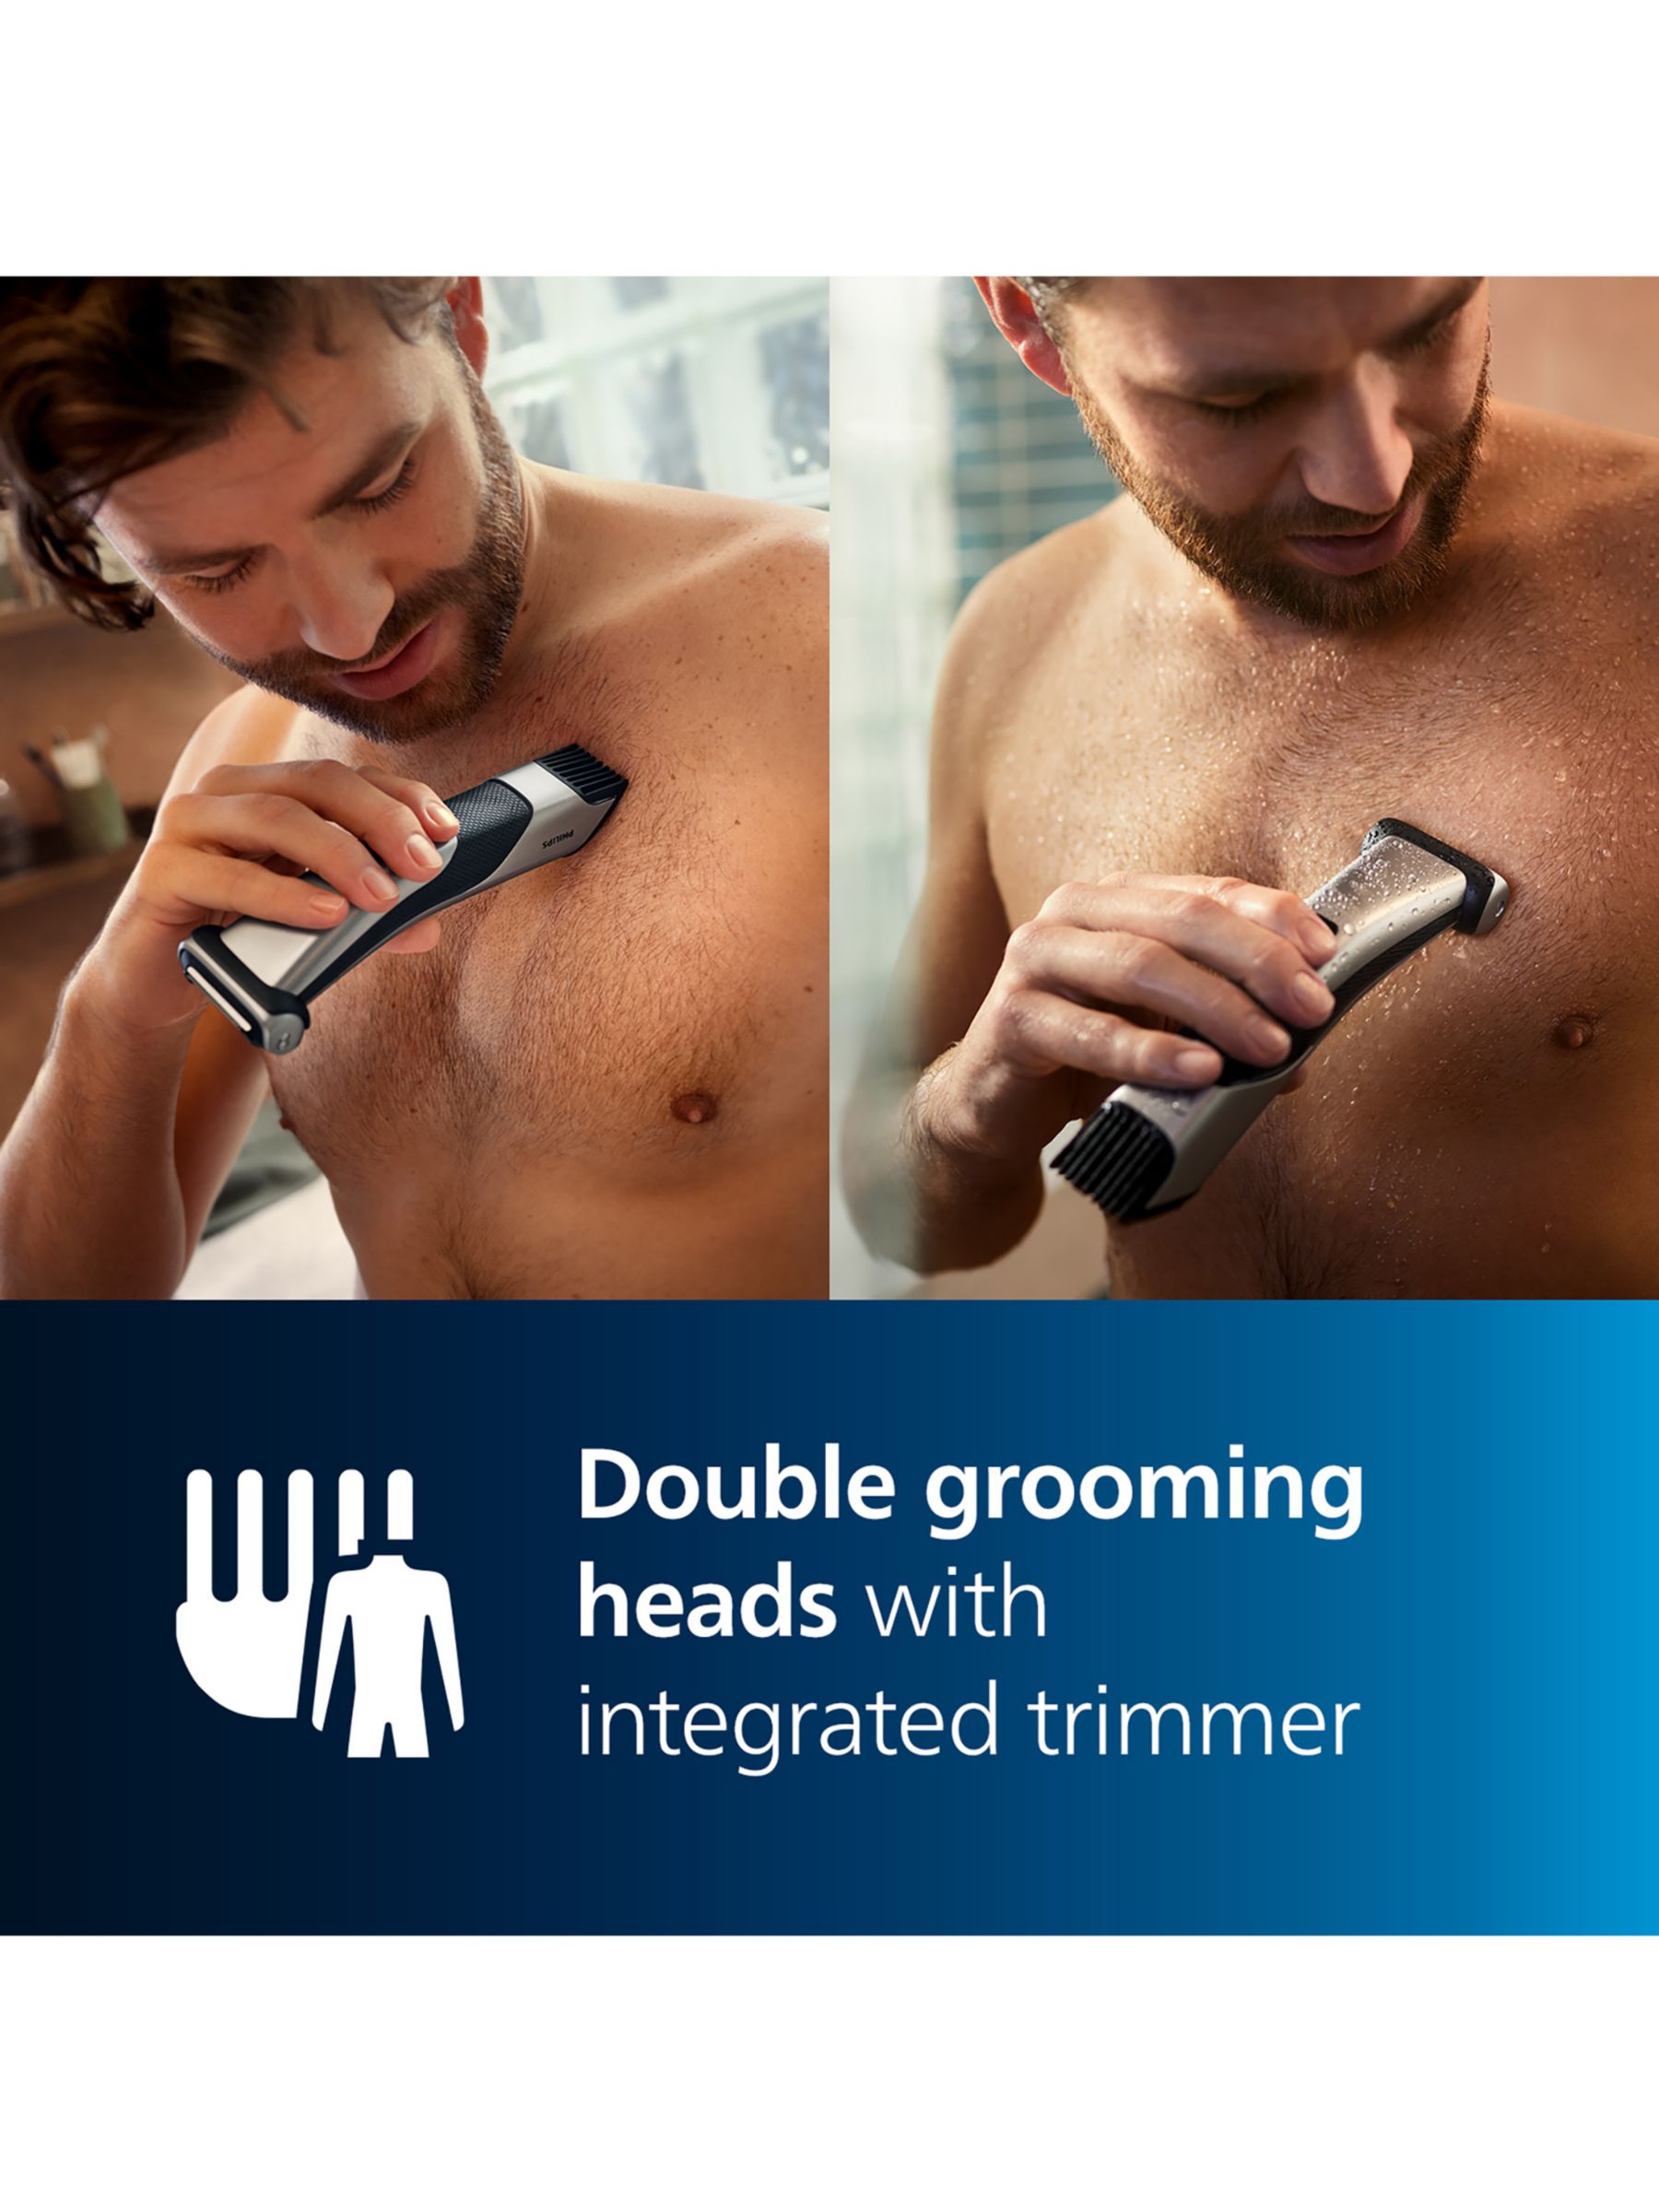 philips trimmer and body groomer